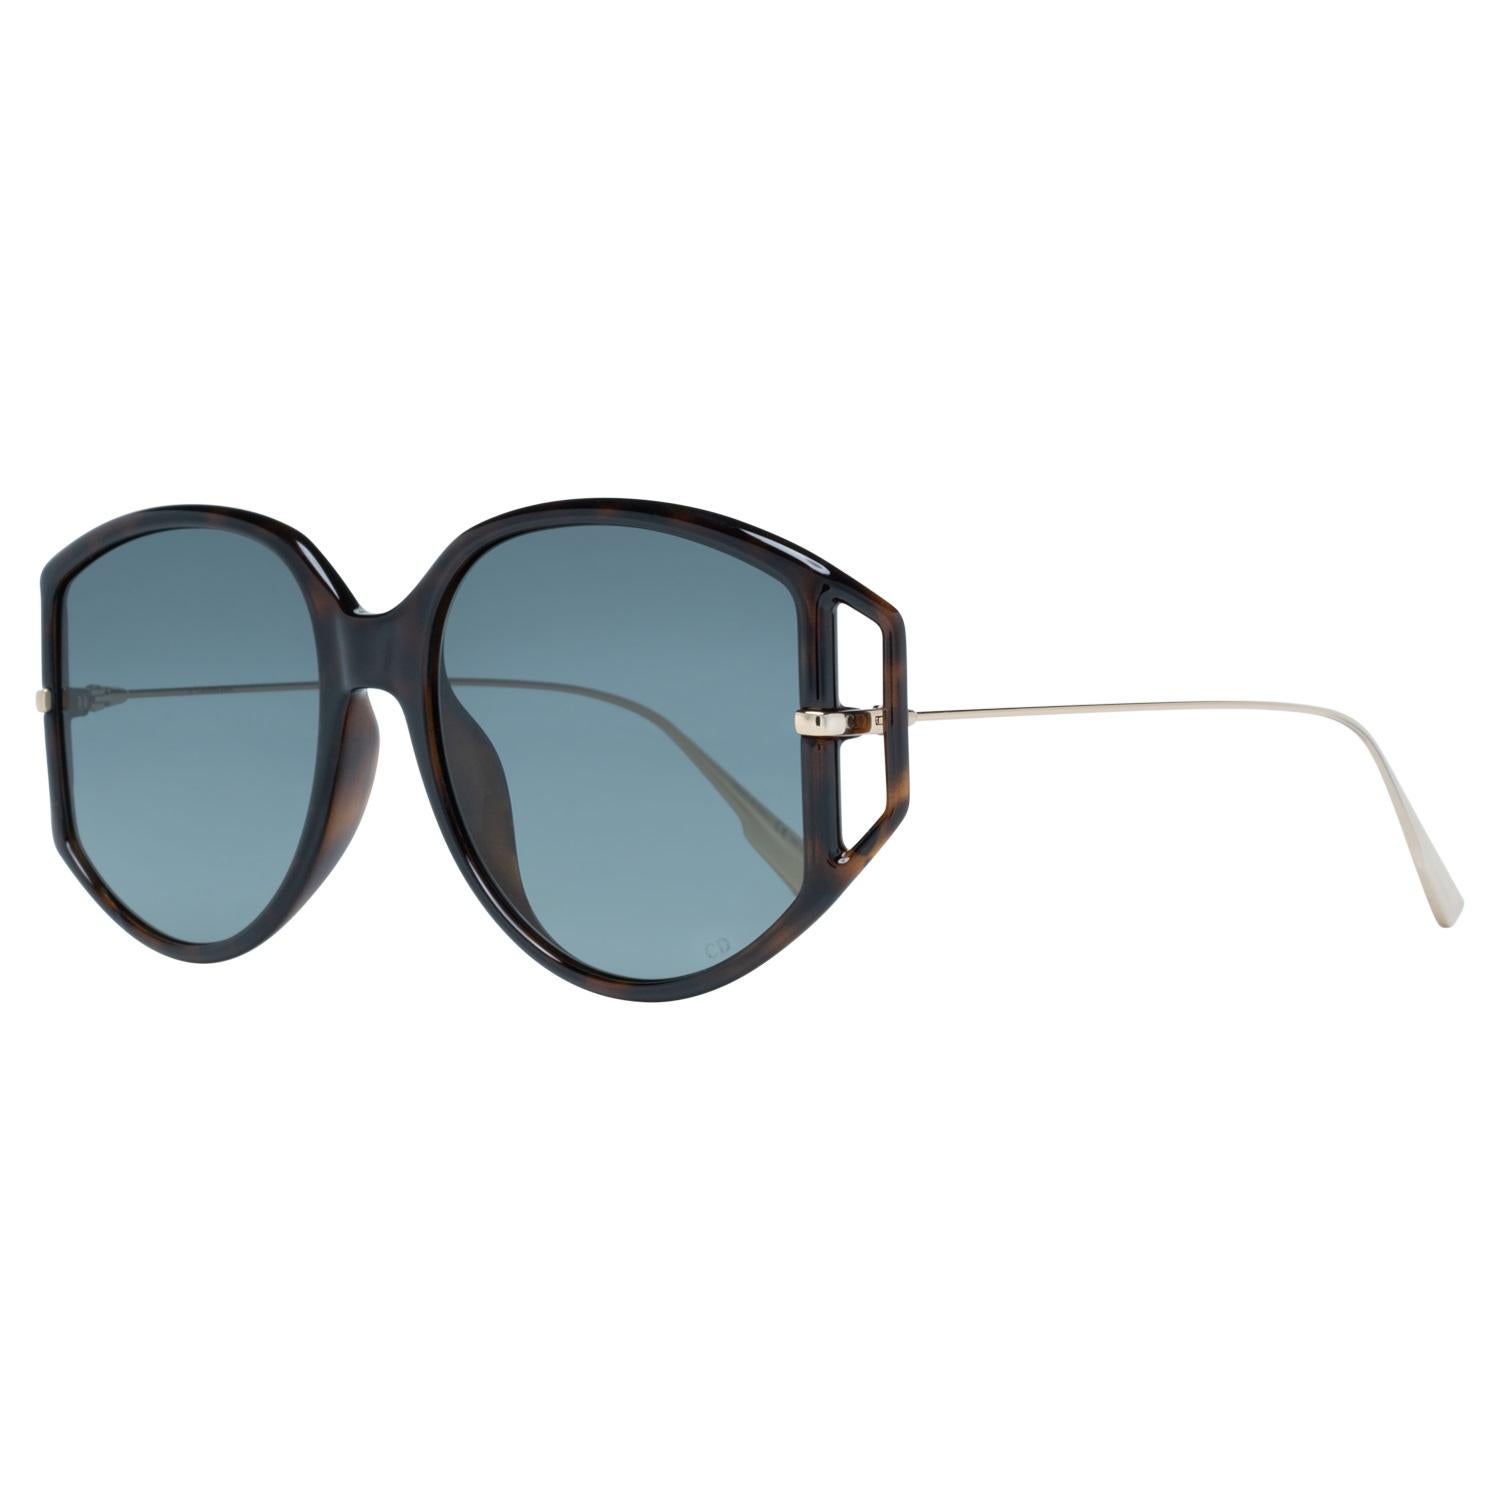 Details

MATERIAL: Metal

COLOR: Brown

MODEL: Diordirection2 0861I54

GENDER: Women

COUNTRY OF MANUFACTURE: Italy

TYPE: Sunglasses

ORIGINAL CASE?: Yes

STYLE: Oval

OCCASION: Casual

FEATURES: Lightweight

LENS COLOR: Grey

LENS TECHNOLOGY: No